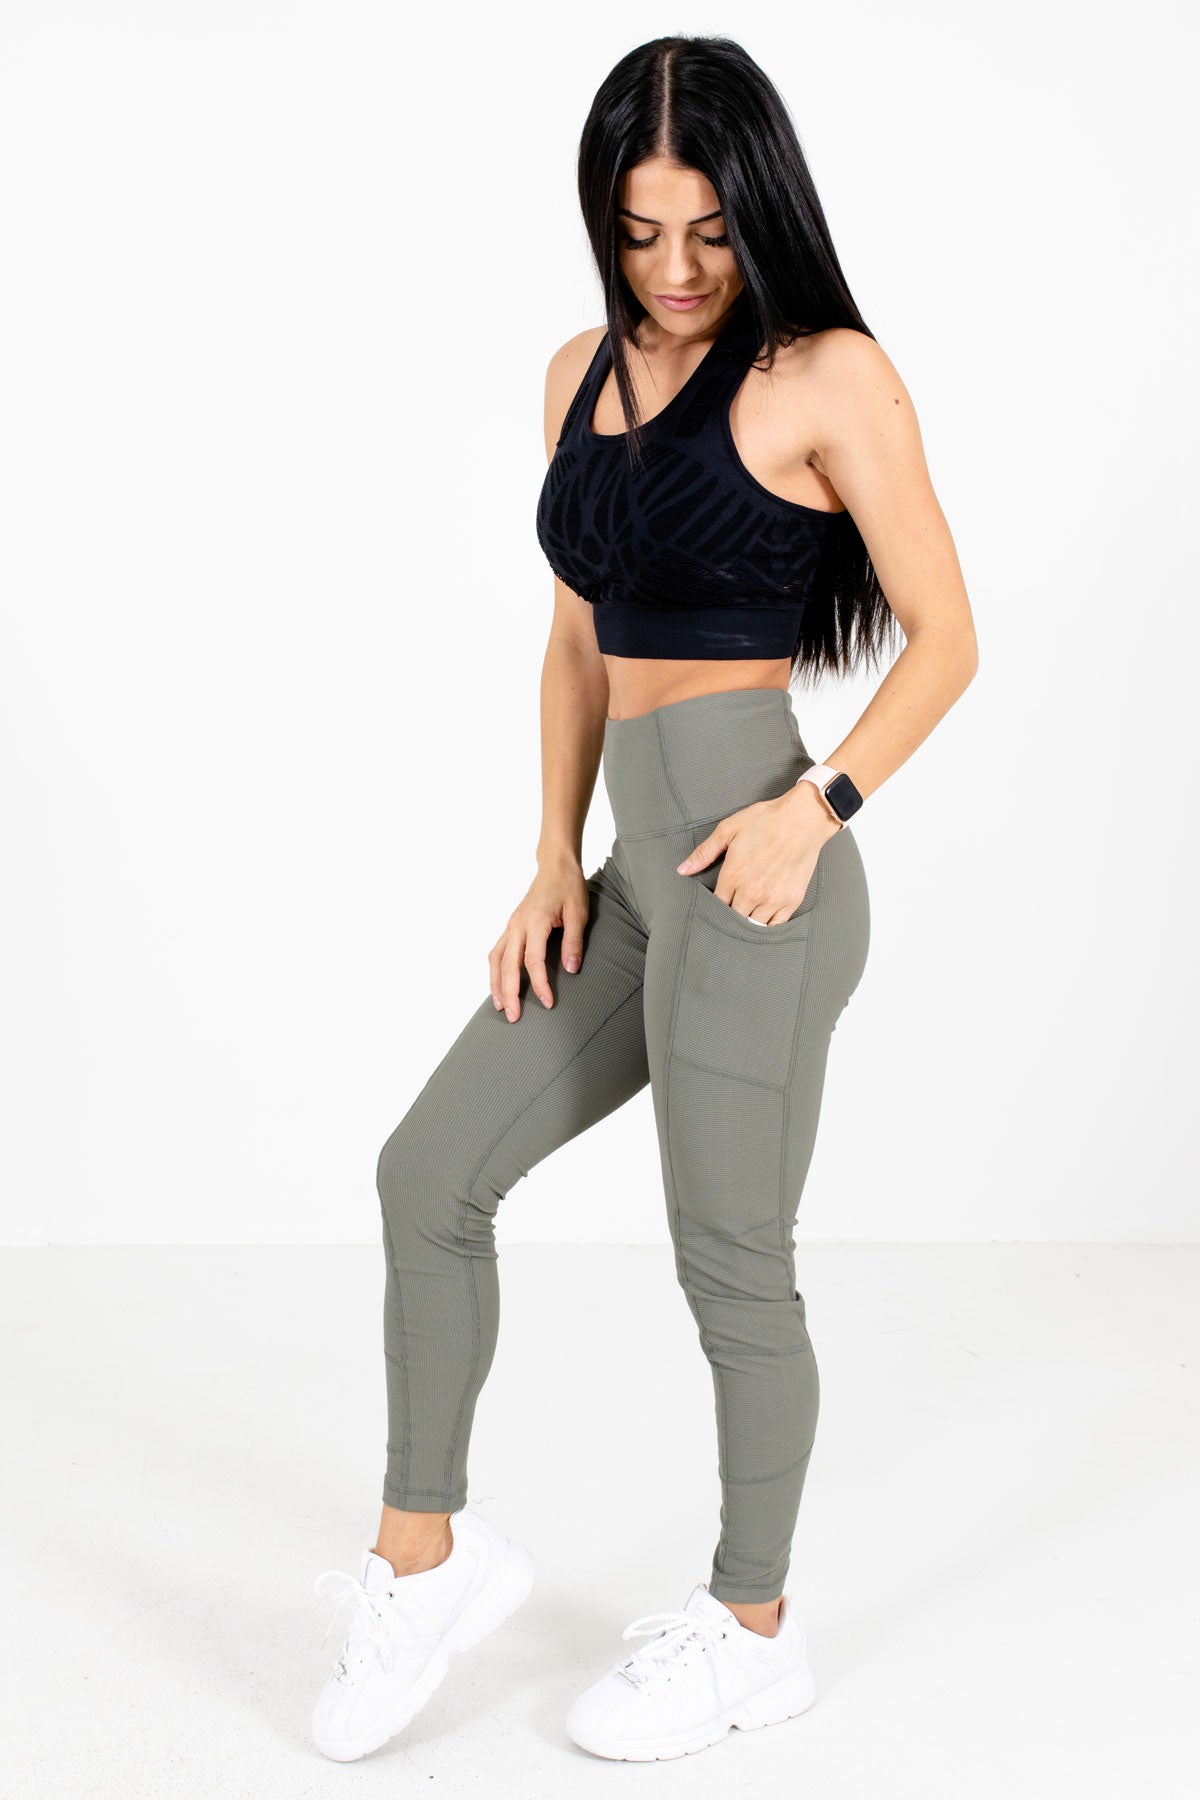 Olive Green High Waisted Style Boutique Active Leggings for Women